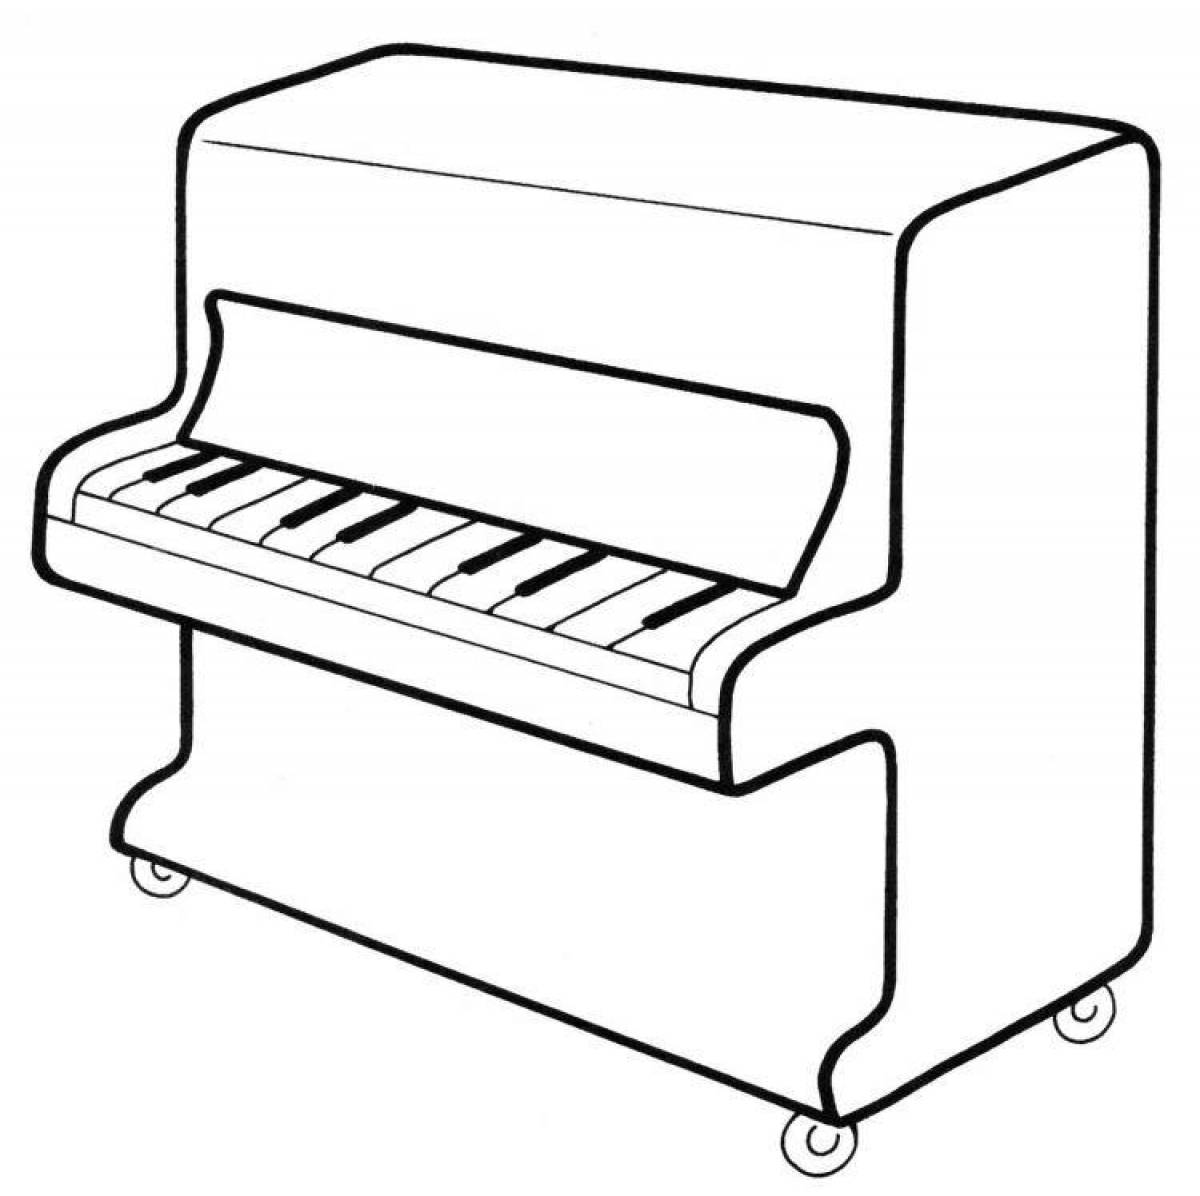 Dazzling piano coloring page